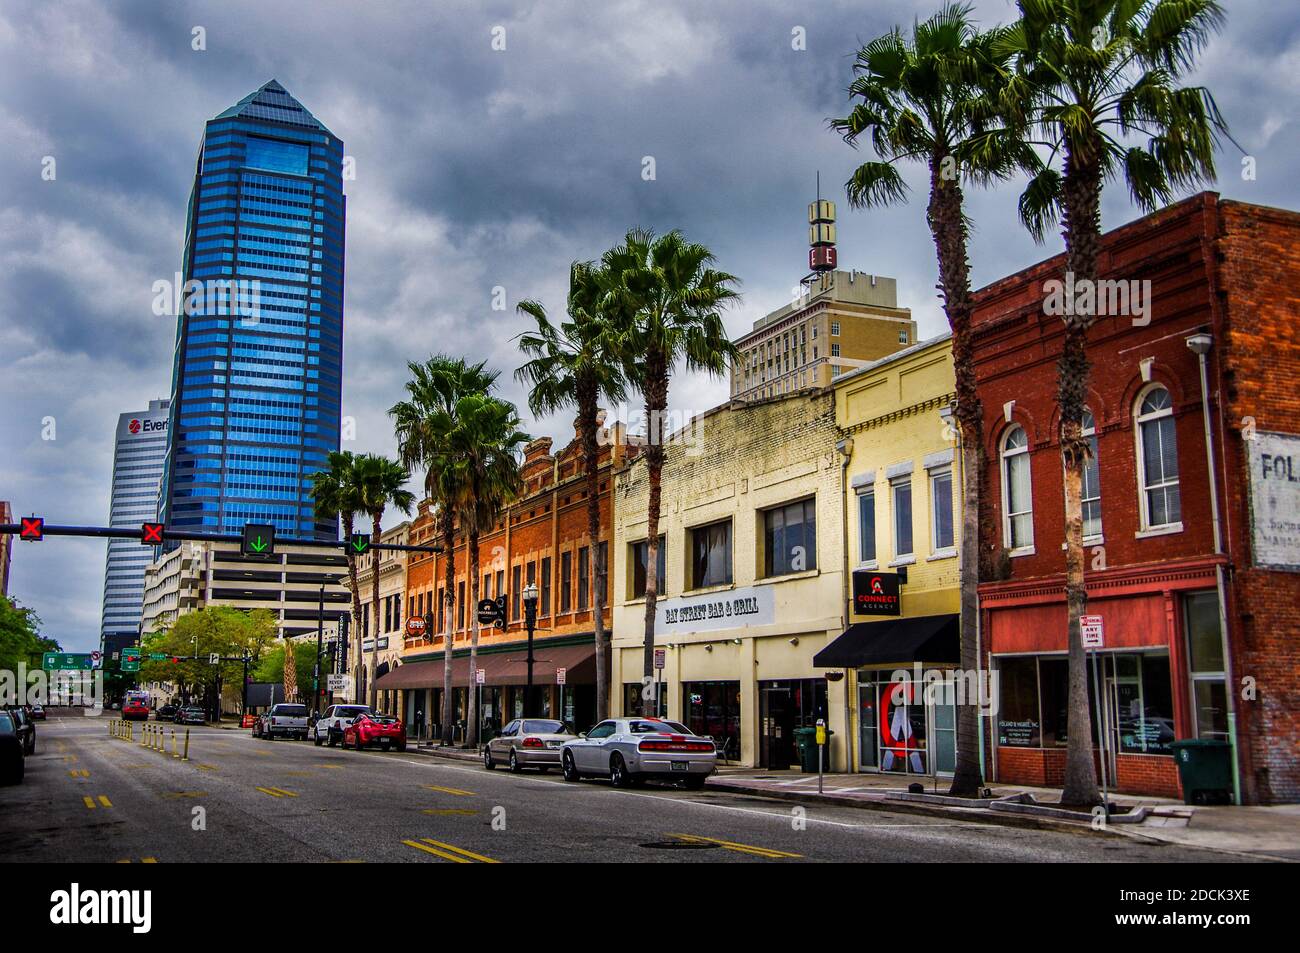 Jacksonville, FL--Mar 18, 2018; Downtown shows a mix of historic and modern architecture along palm tree bordered streets Stock Photo